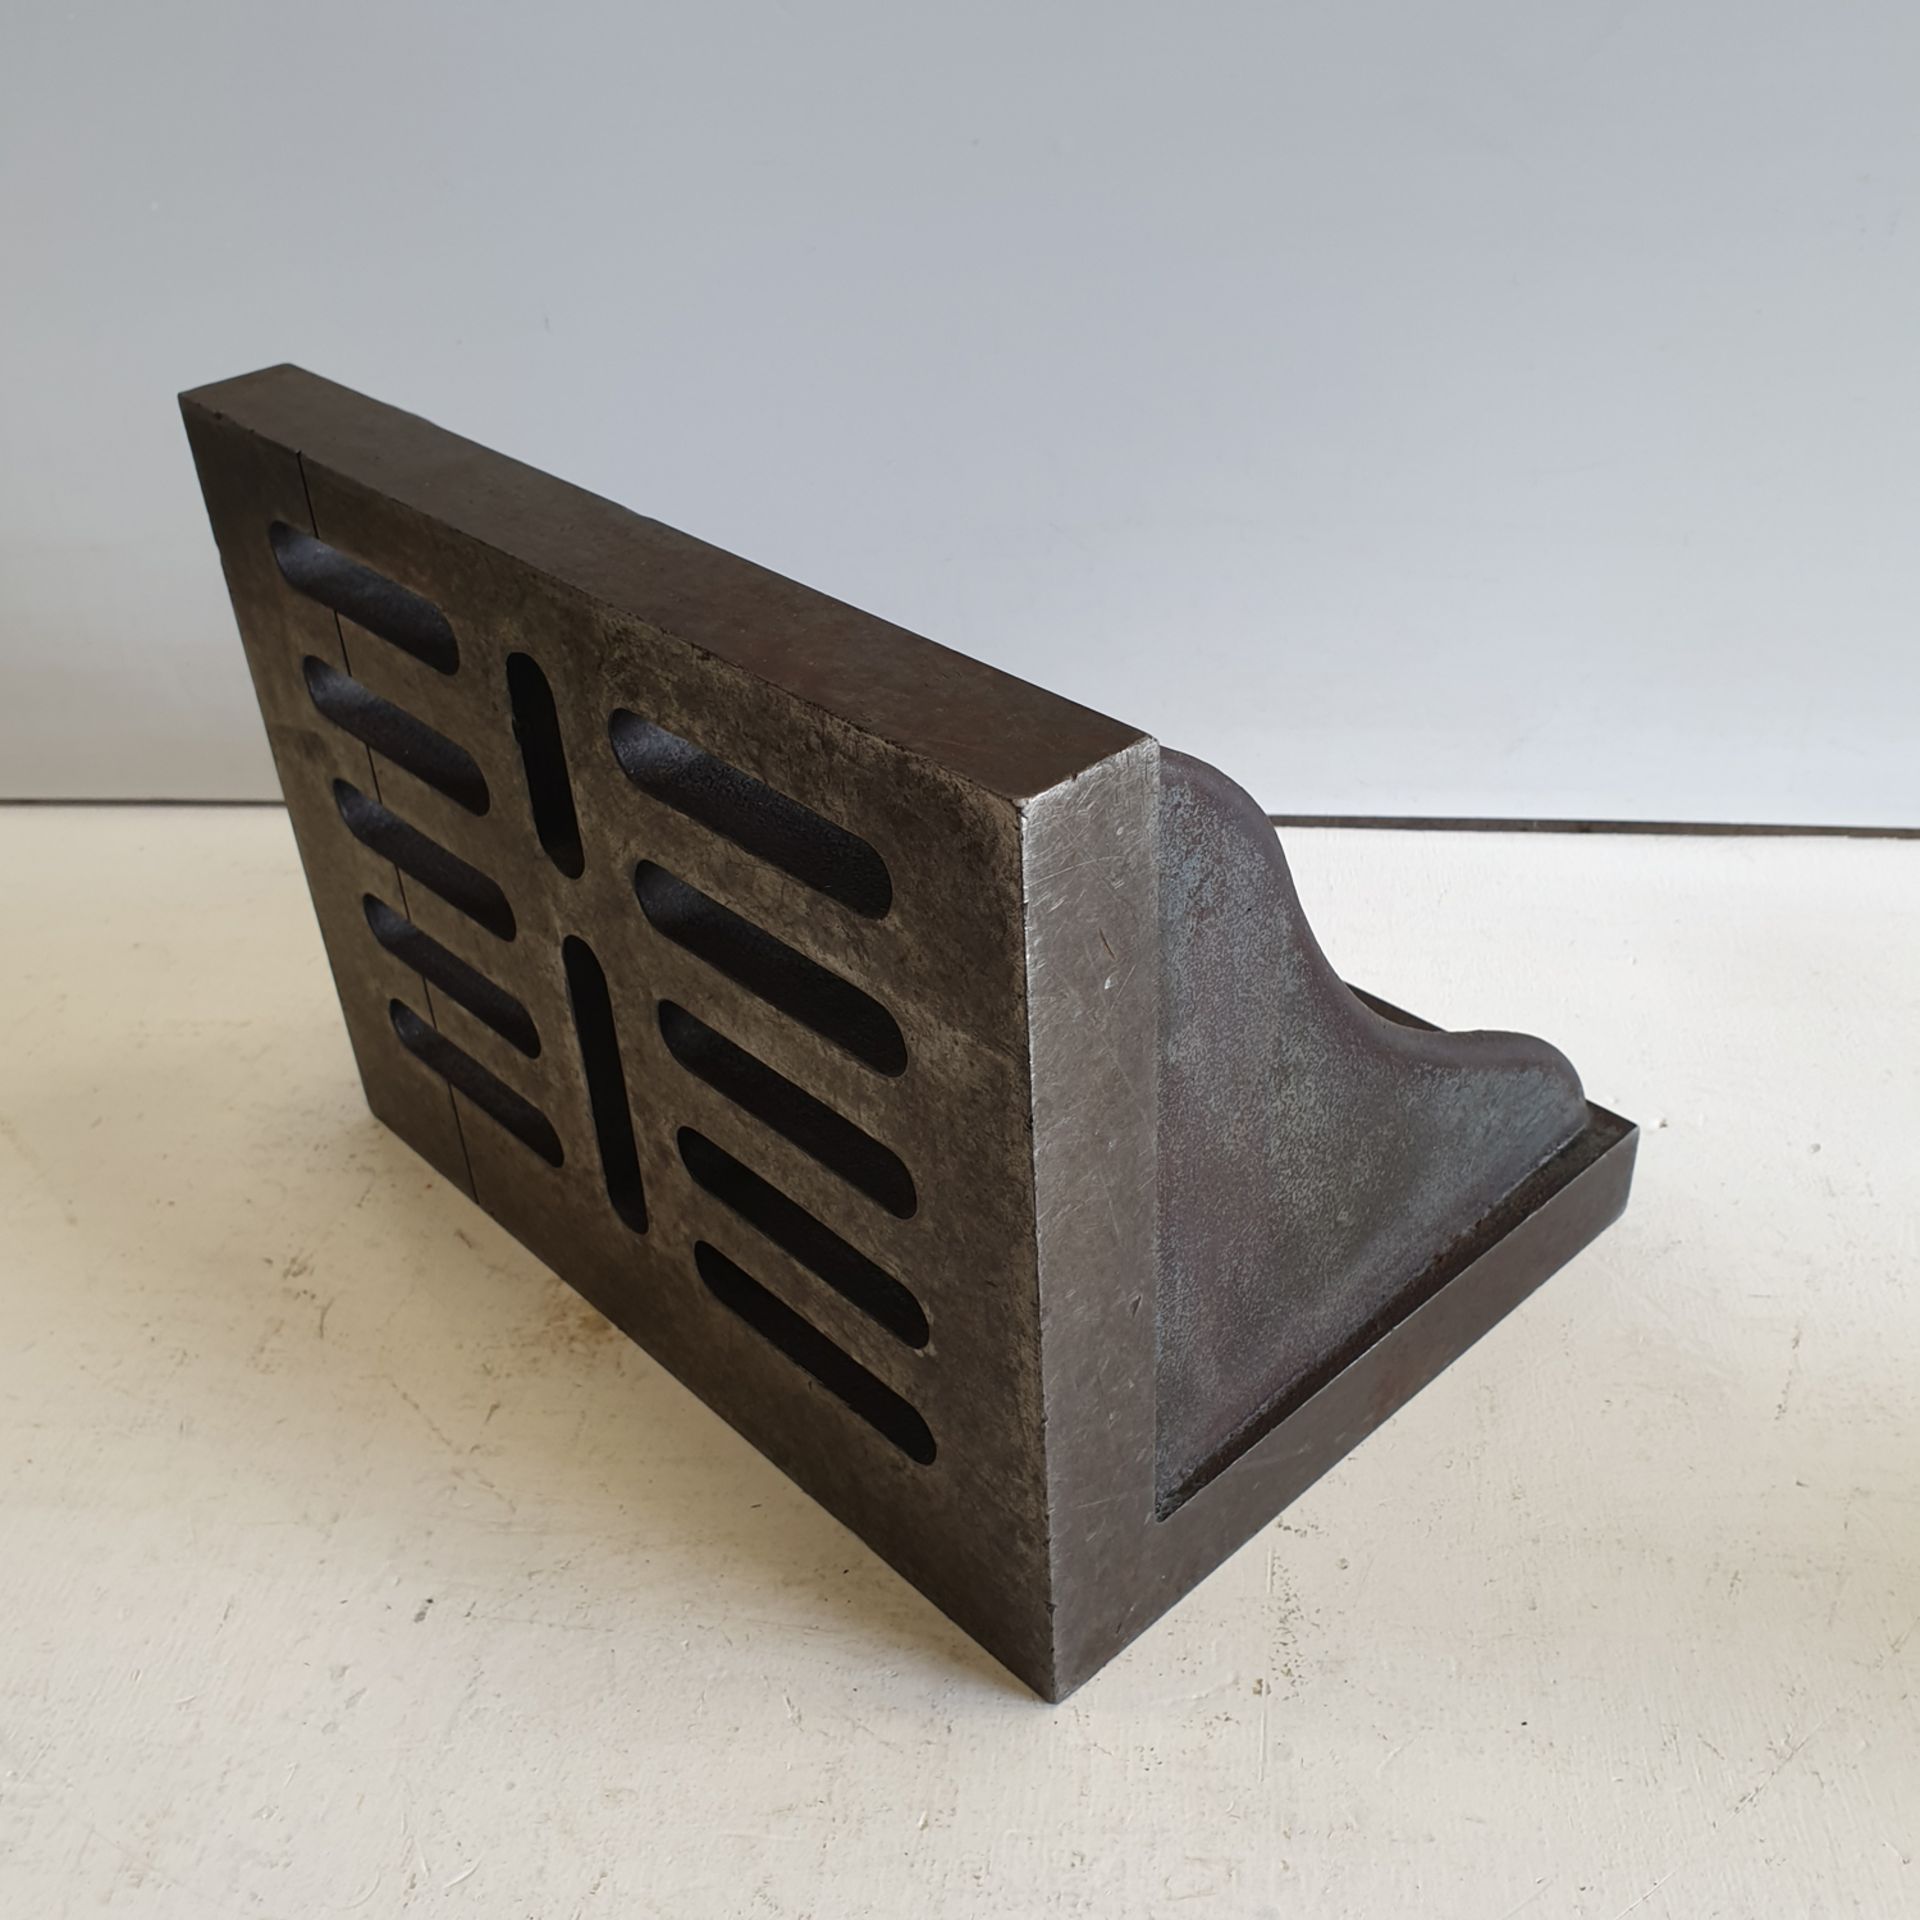 Slotted Webbed Angle Plate. Size 12" x 9" x 9". - Image 3 of 4